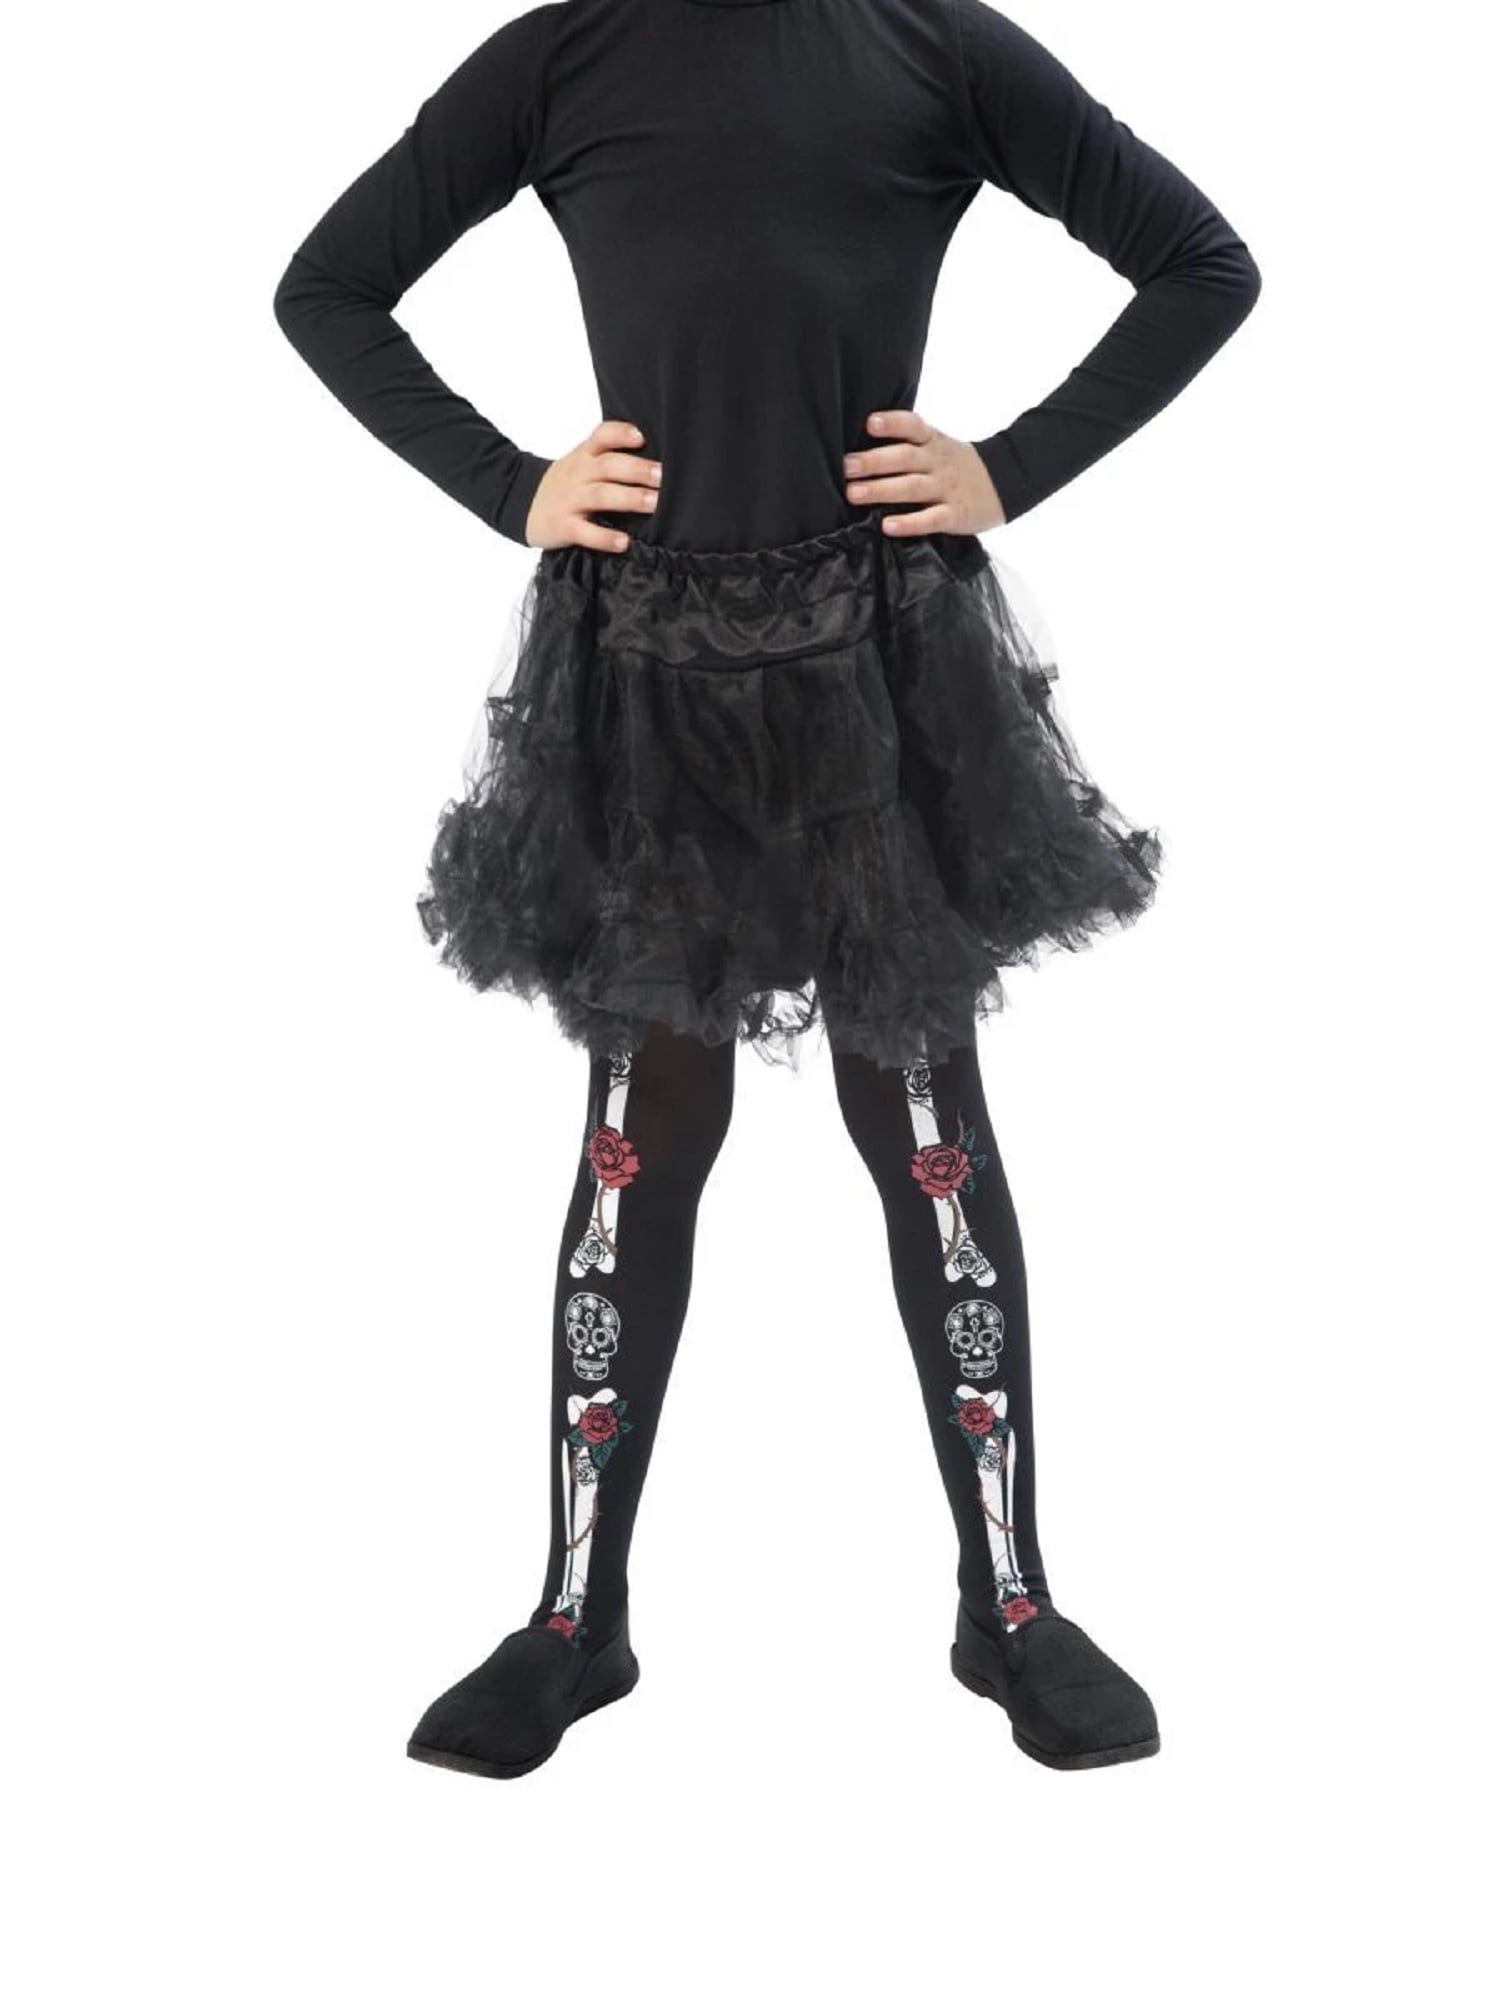 Tights Girls Fancy Dress Halloween Childs Kid Costume Day of the Dead Mermaid 